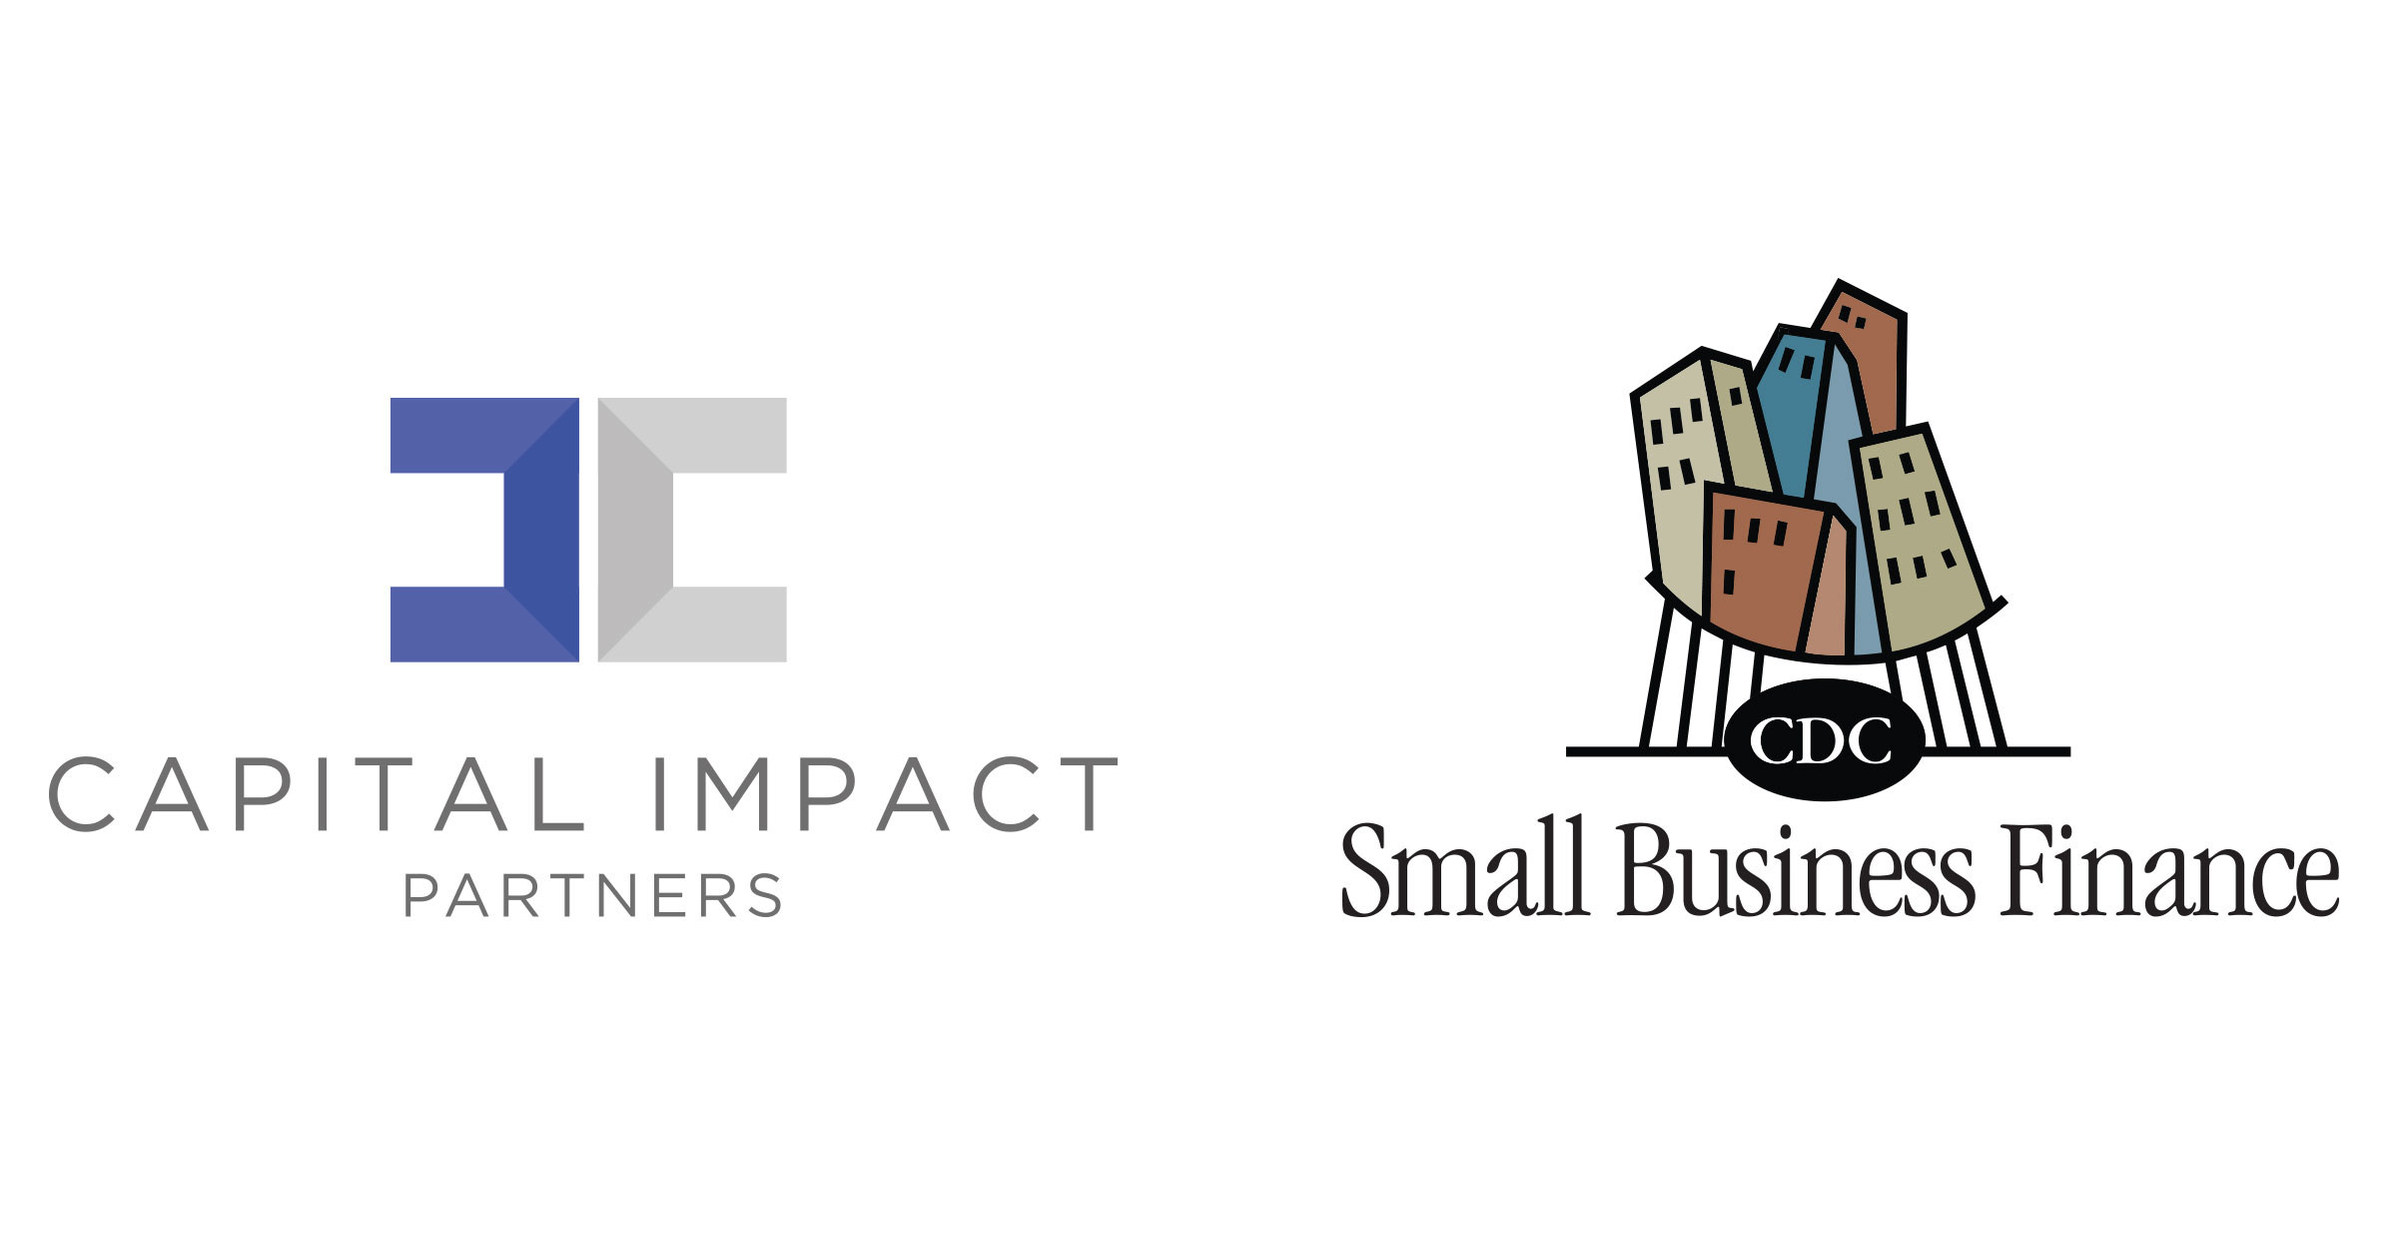 CDC Small Business Finance And Capital Impact Partners Announce A New Alliance To Empower Equitable Community Growth